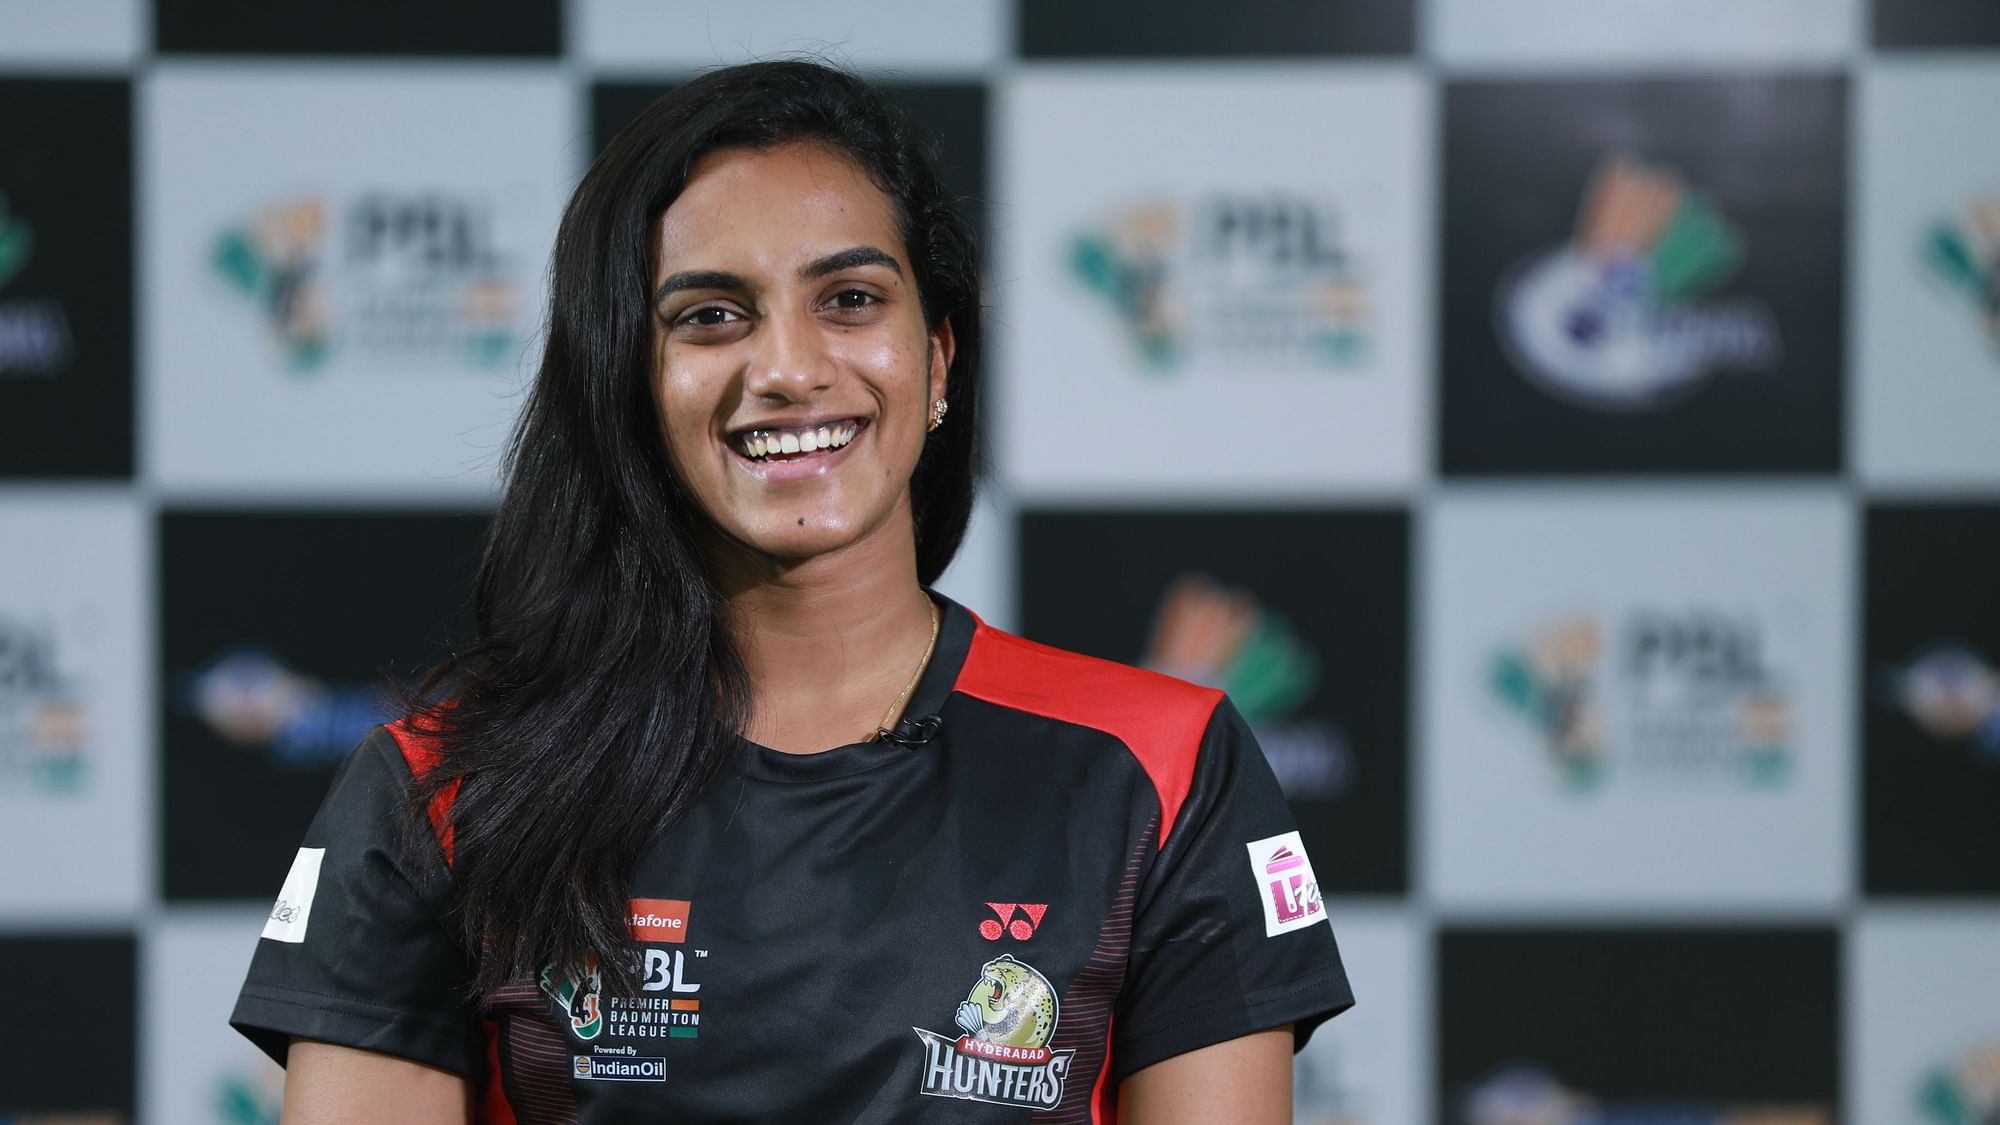 PV Sindhu has spoken about about trying to end the taboo associated with periods and instead should talk about it openly.